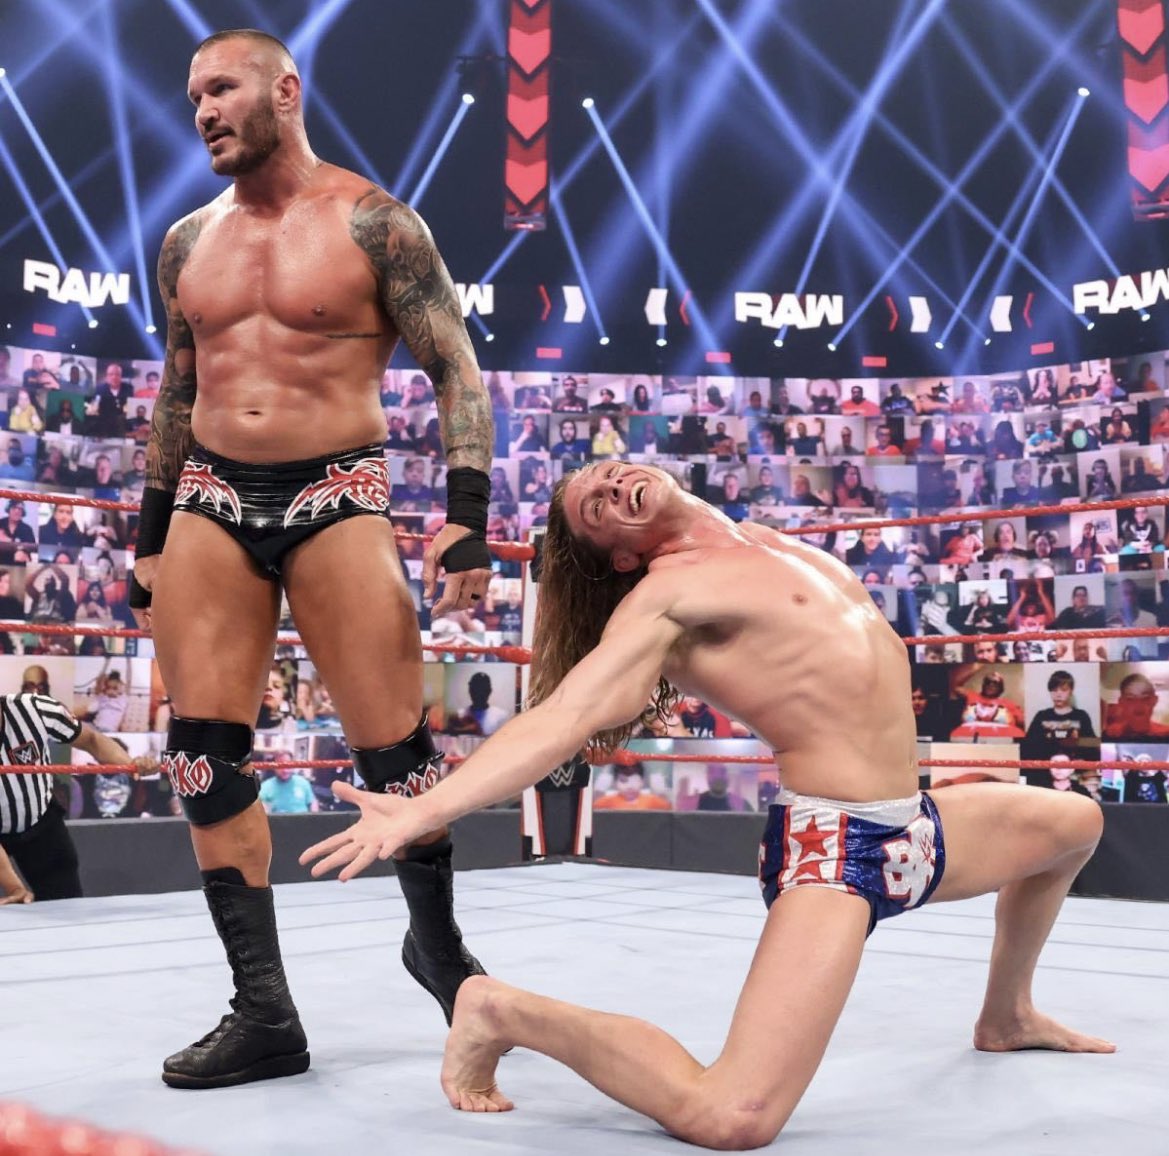 Randy Orton and Matt Riddle have combined to form 'RKBro' on WWE RAW.